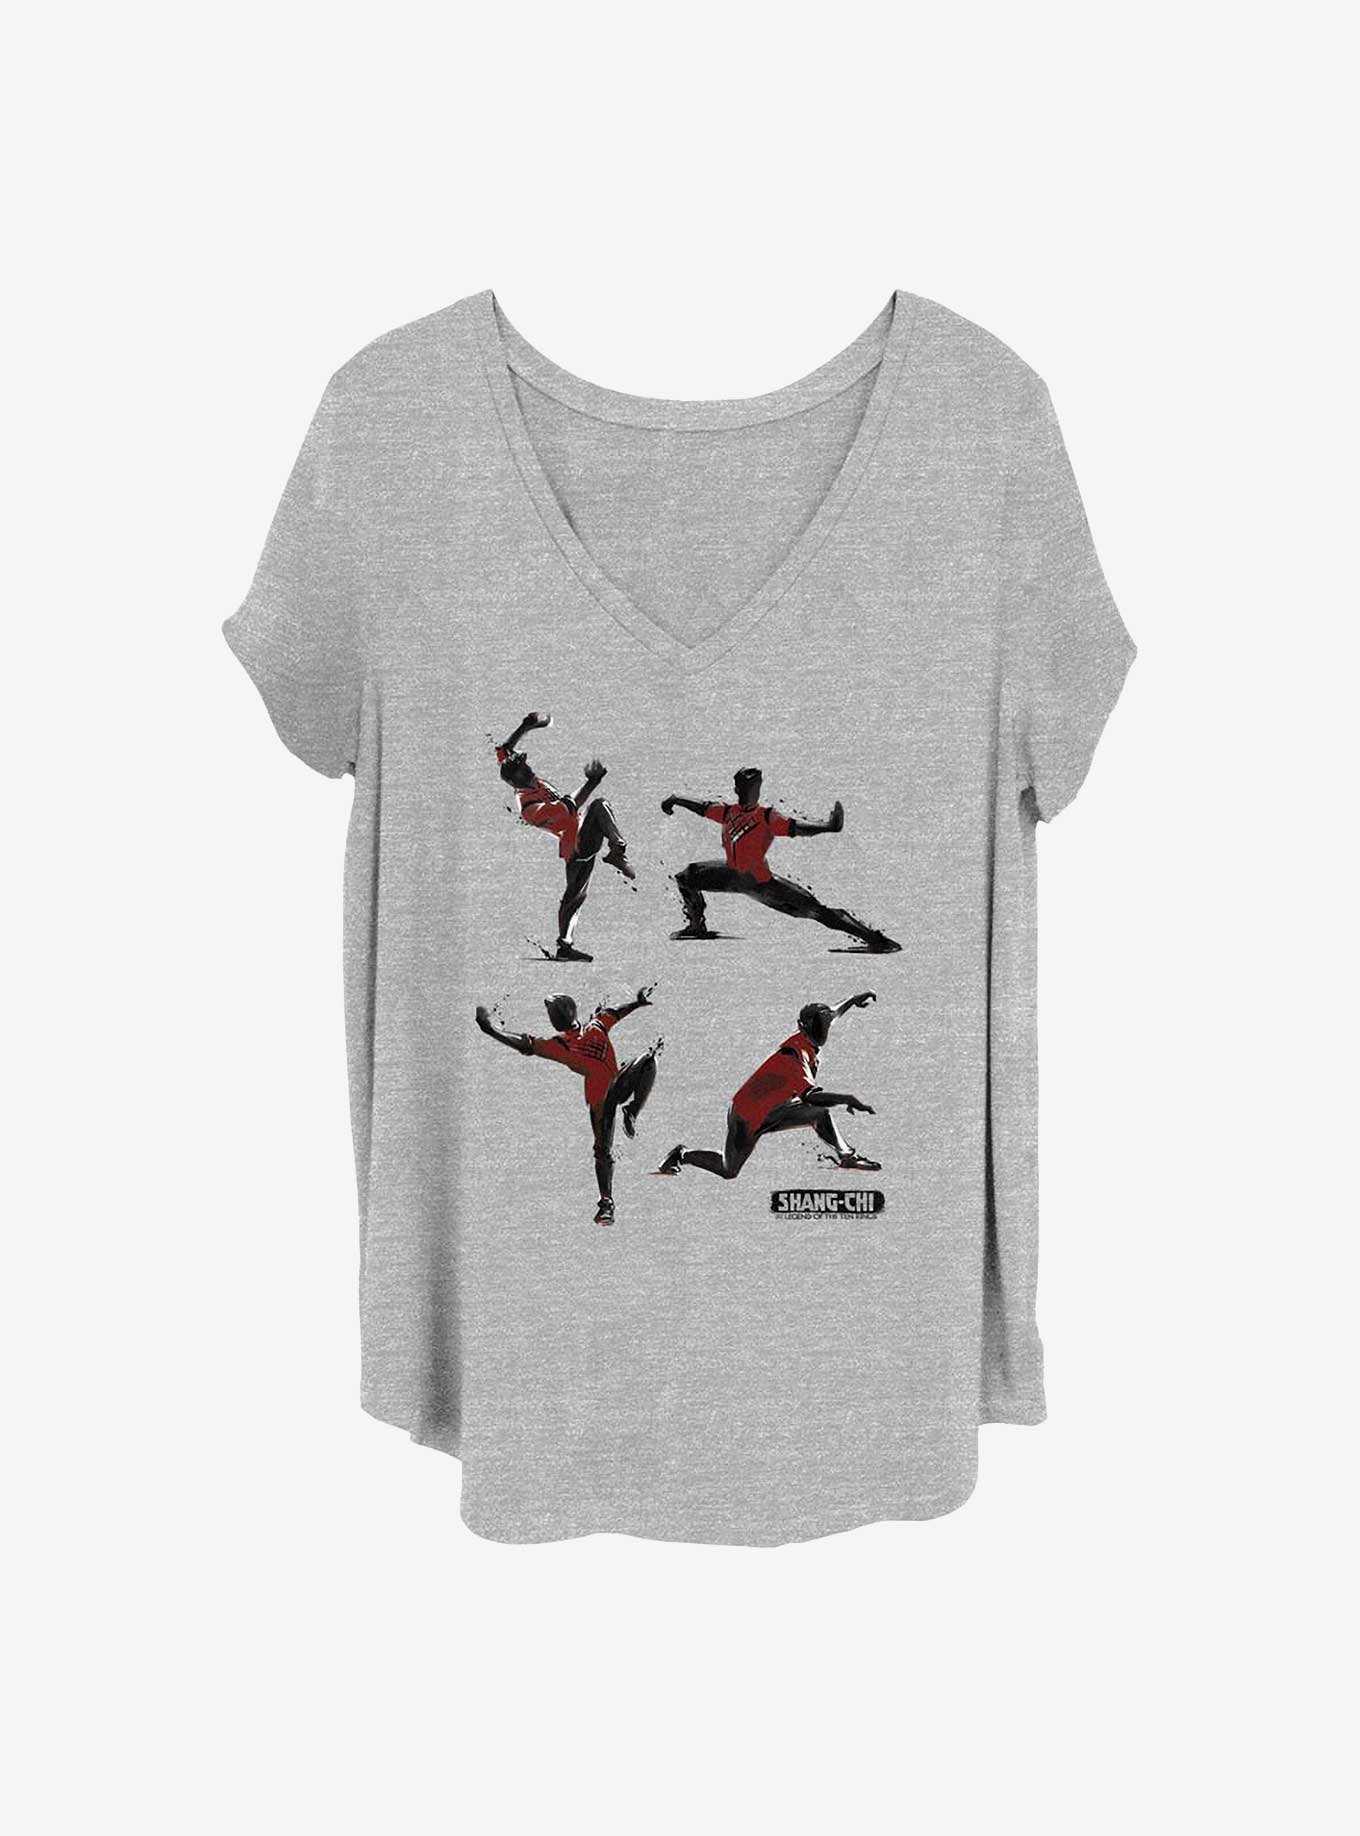 Marvel Shang-Chi and the Legend of the Ten Rings Martial Arts Stance Girls T-Shirt Plus Size, , hi-res